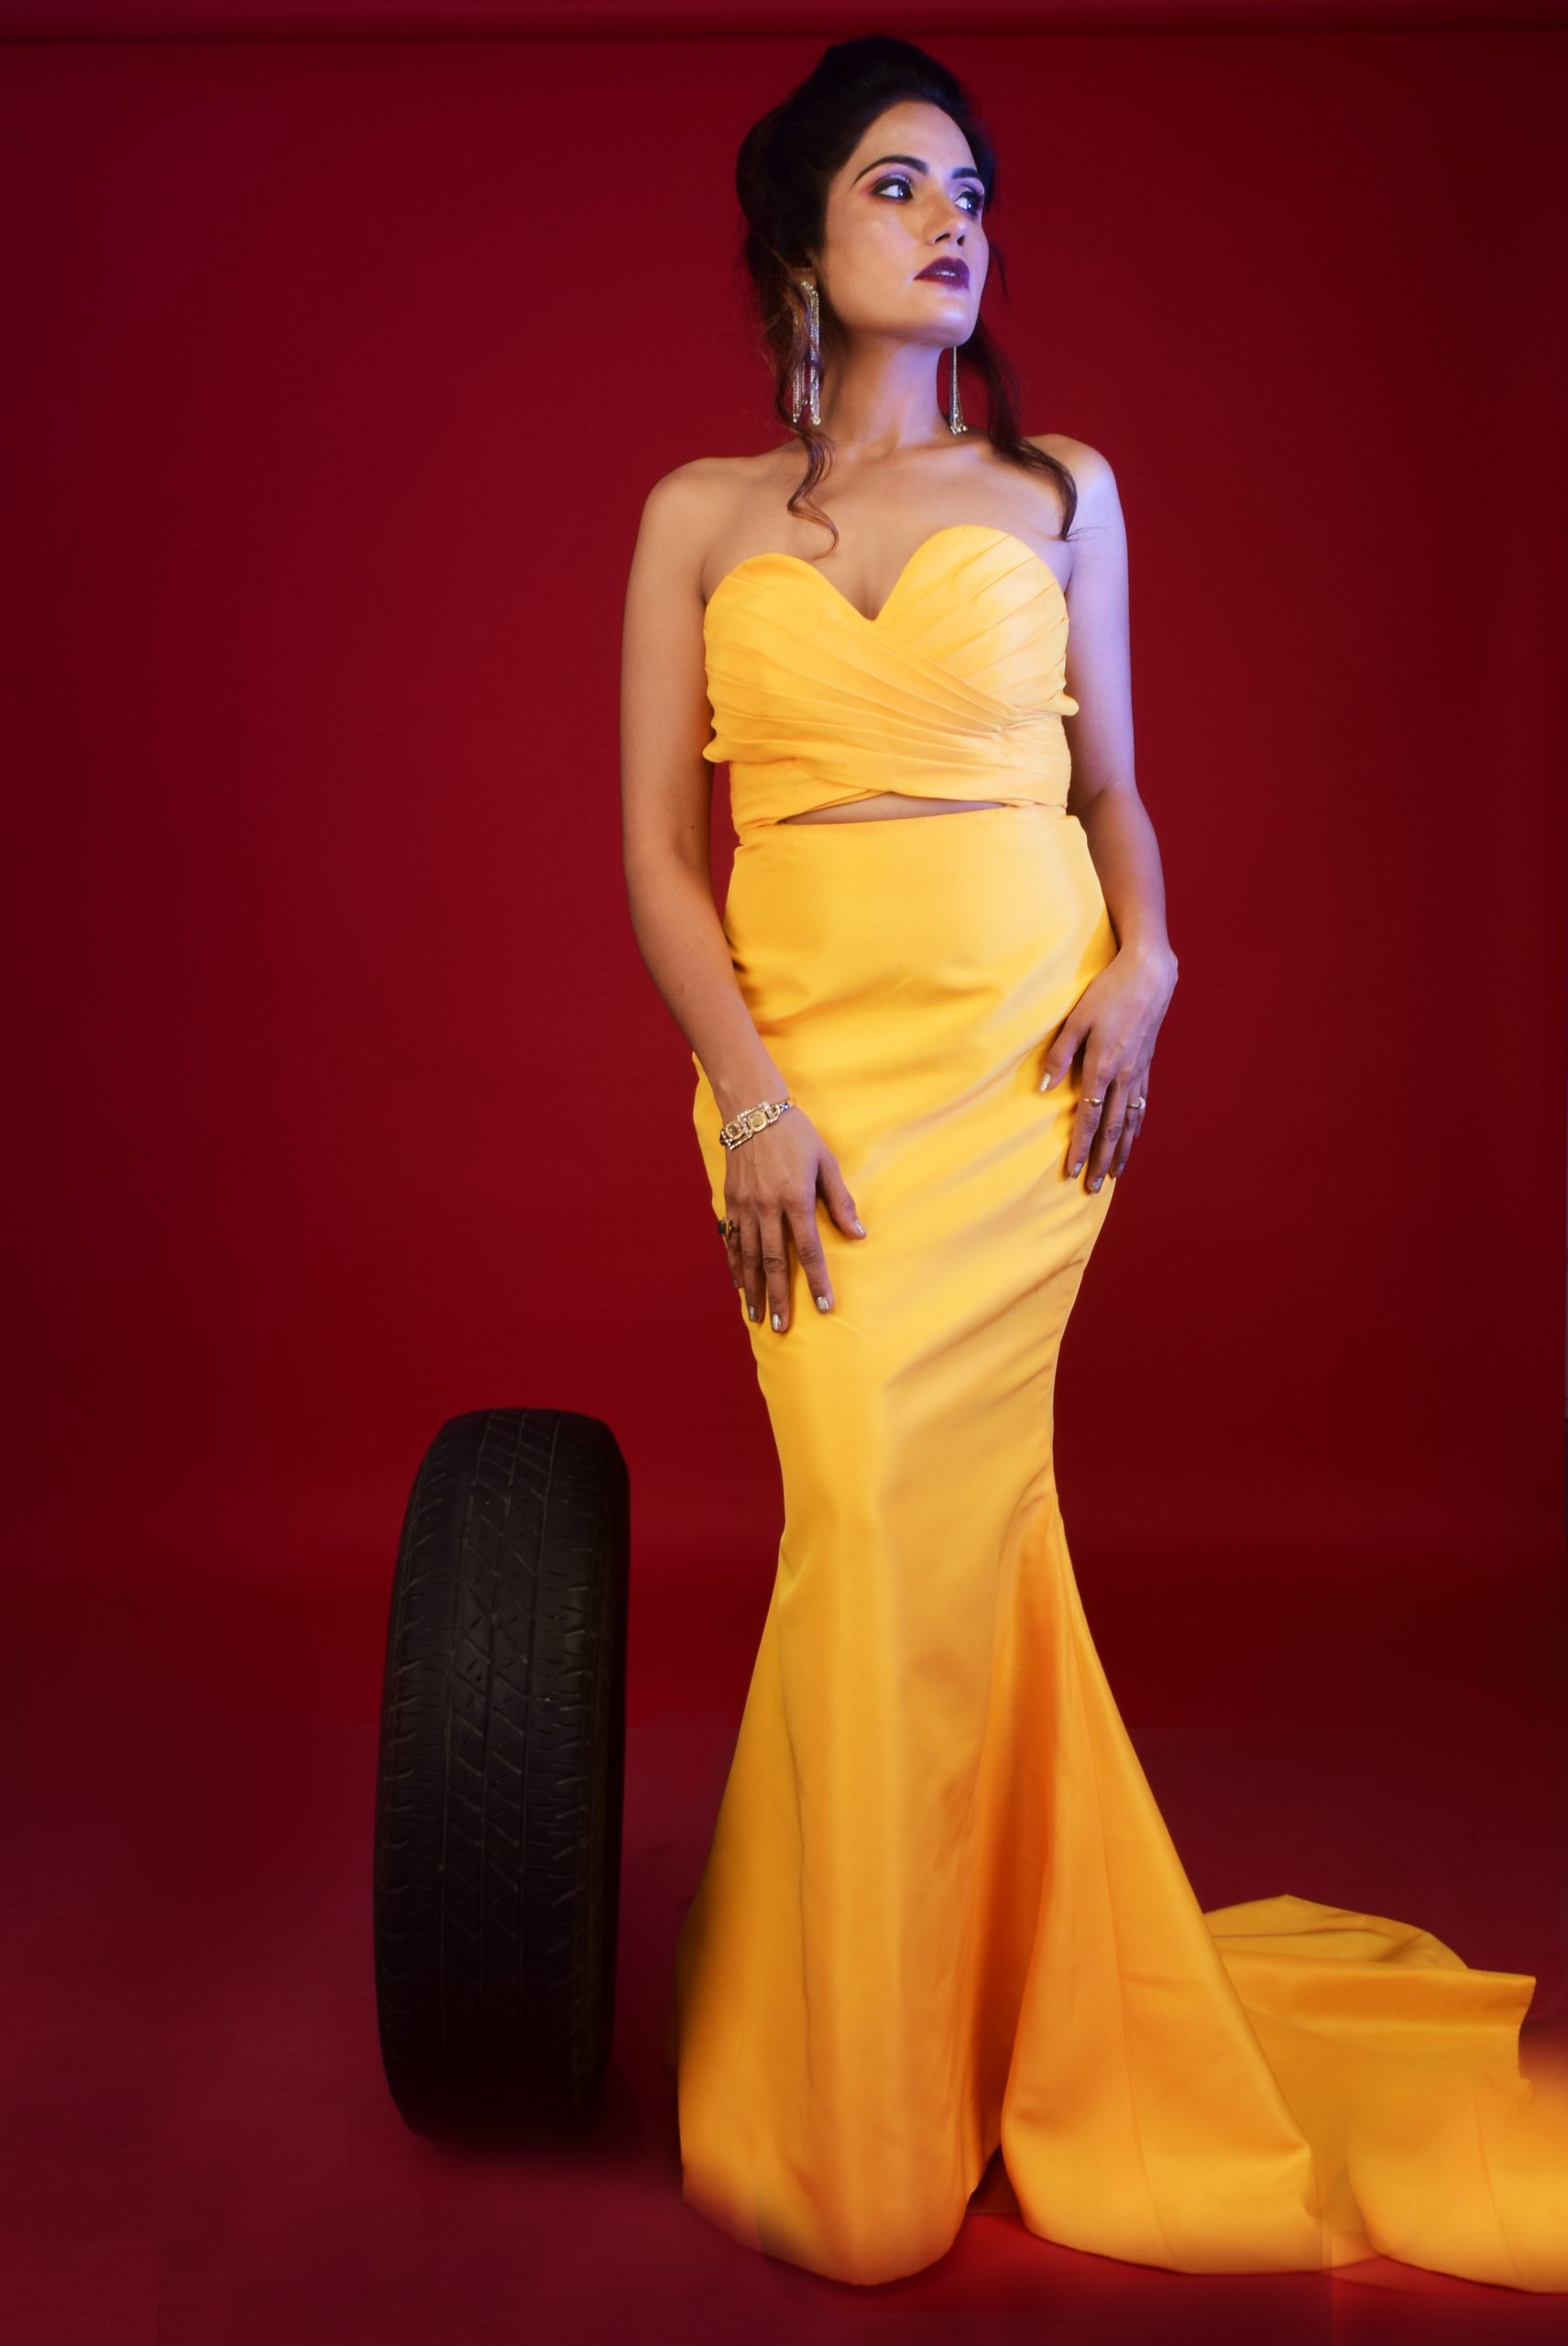 Lady wearing a yellow gown